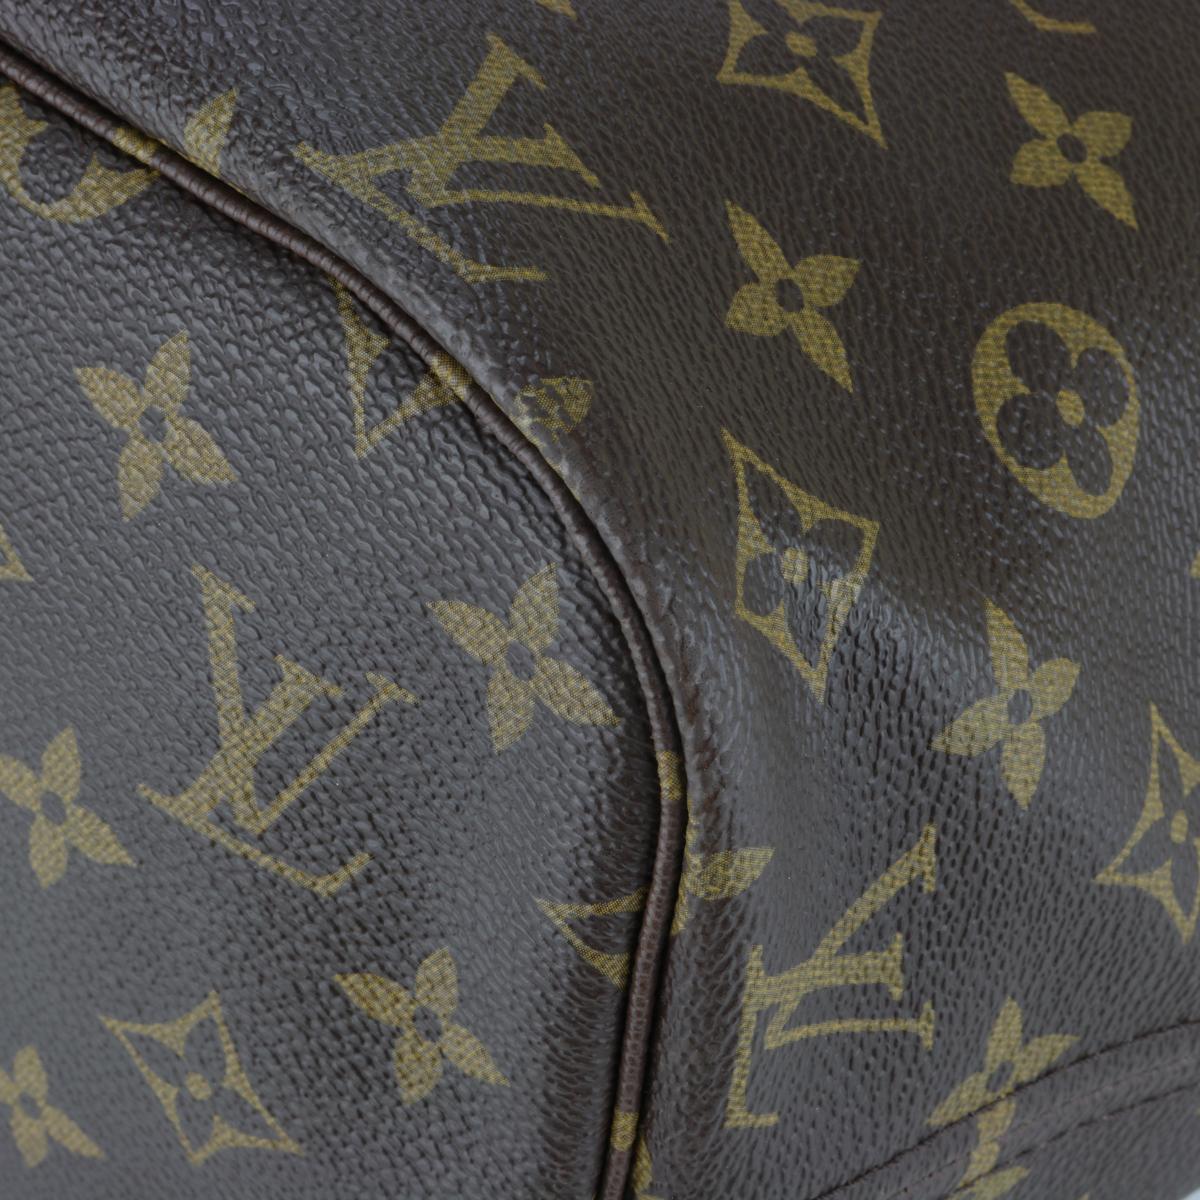 Louis Vuitton Neverfull MM Tote in Monogram with Beige Interior 2018 For Sale 3